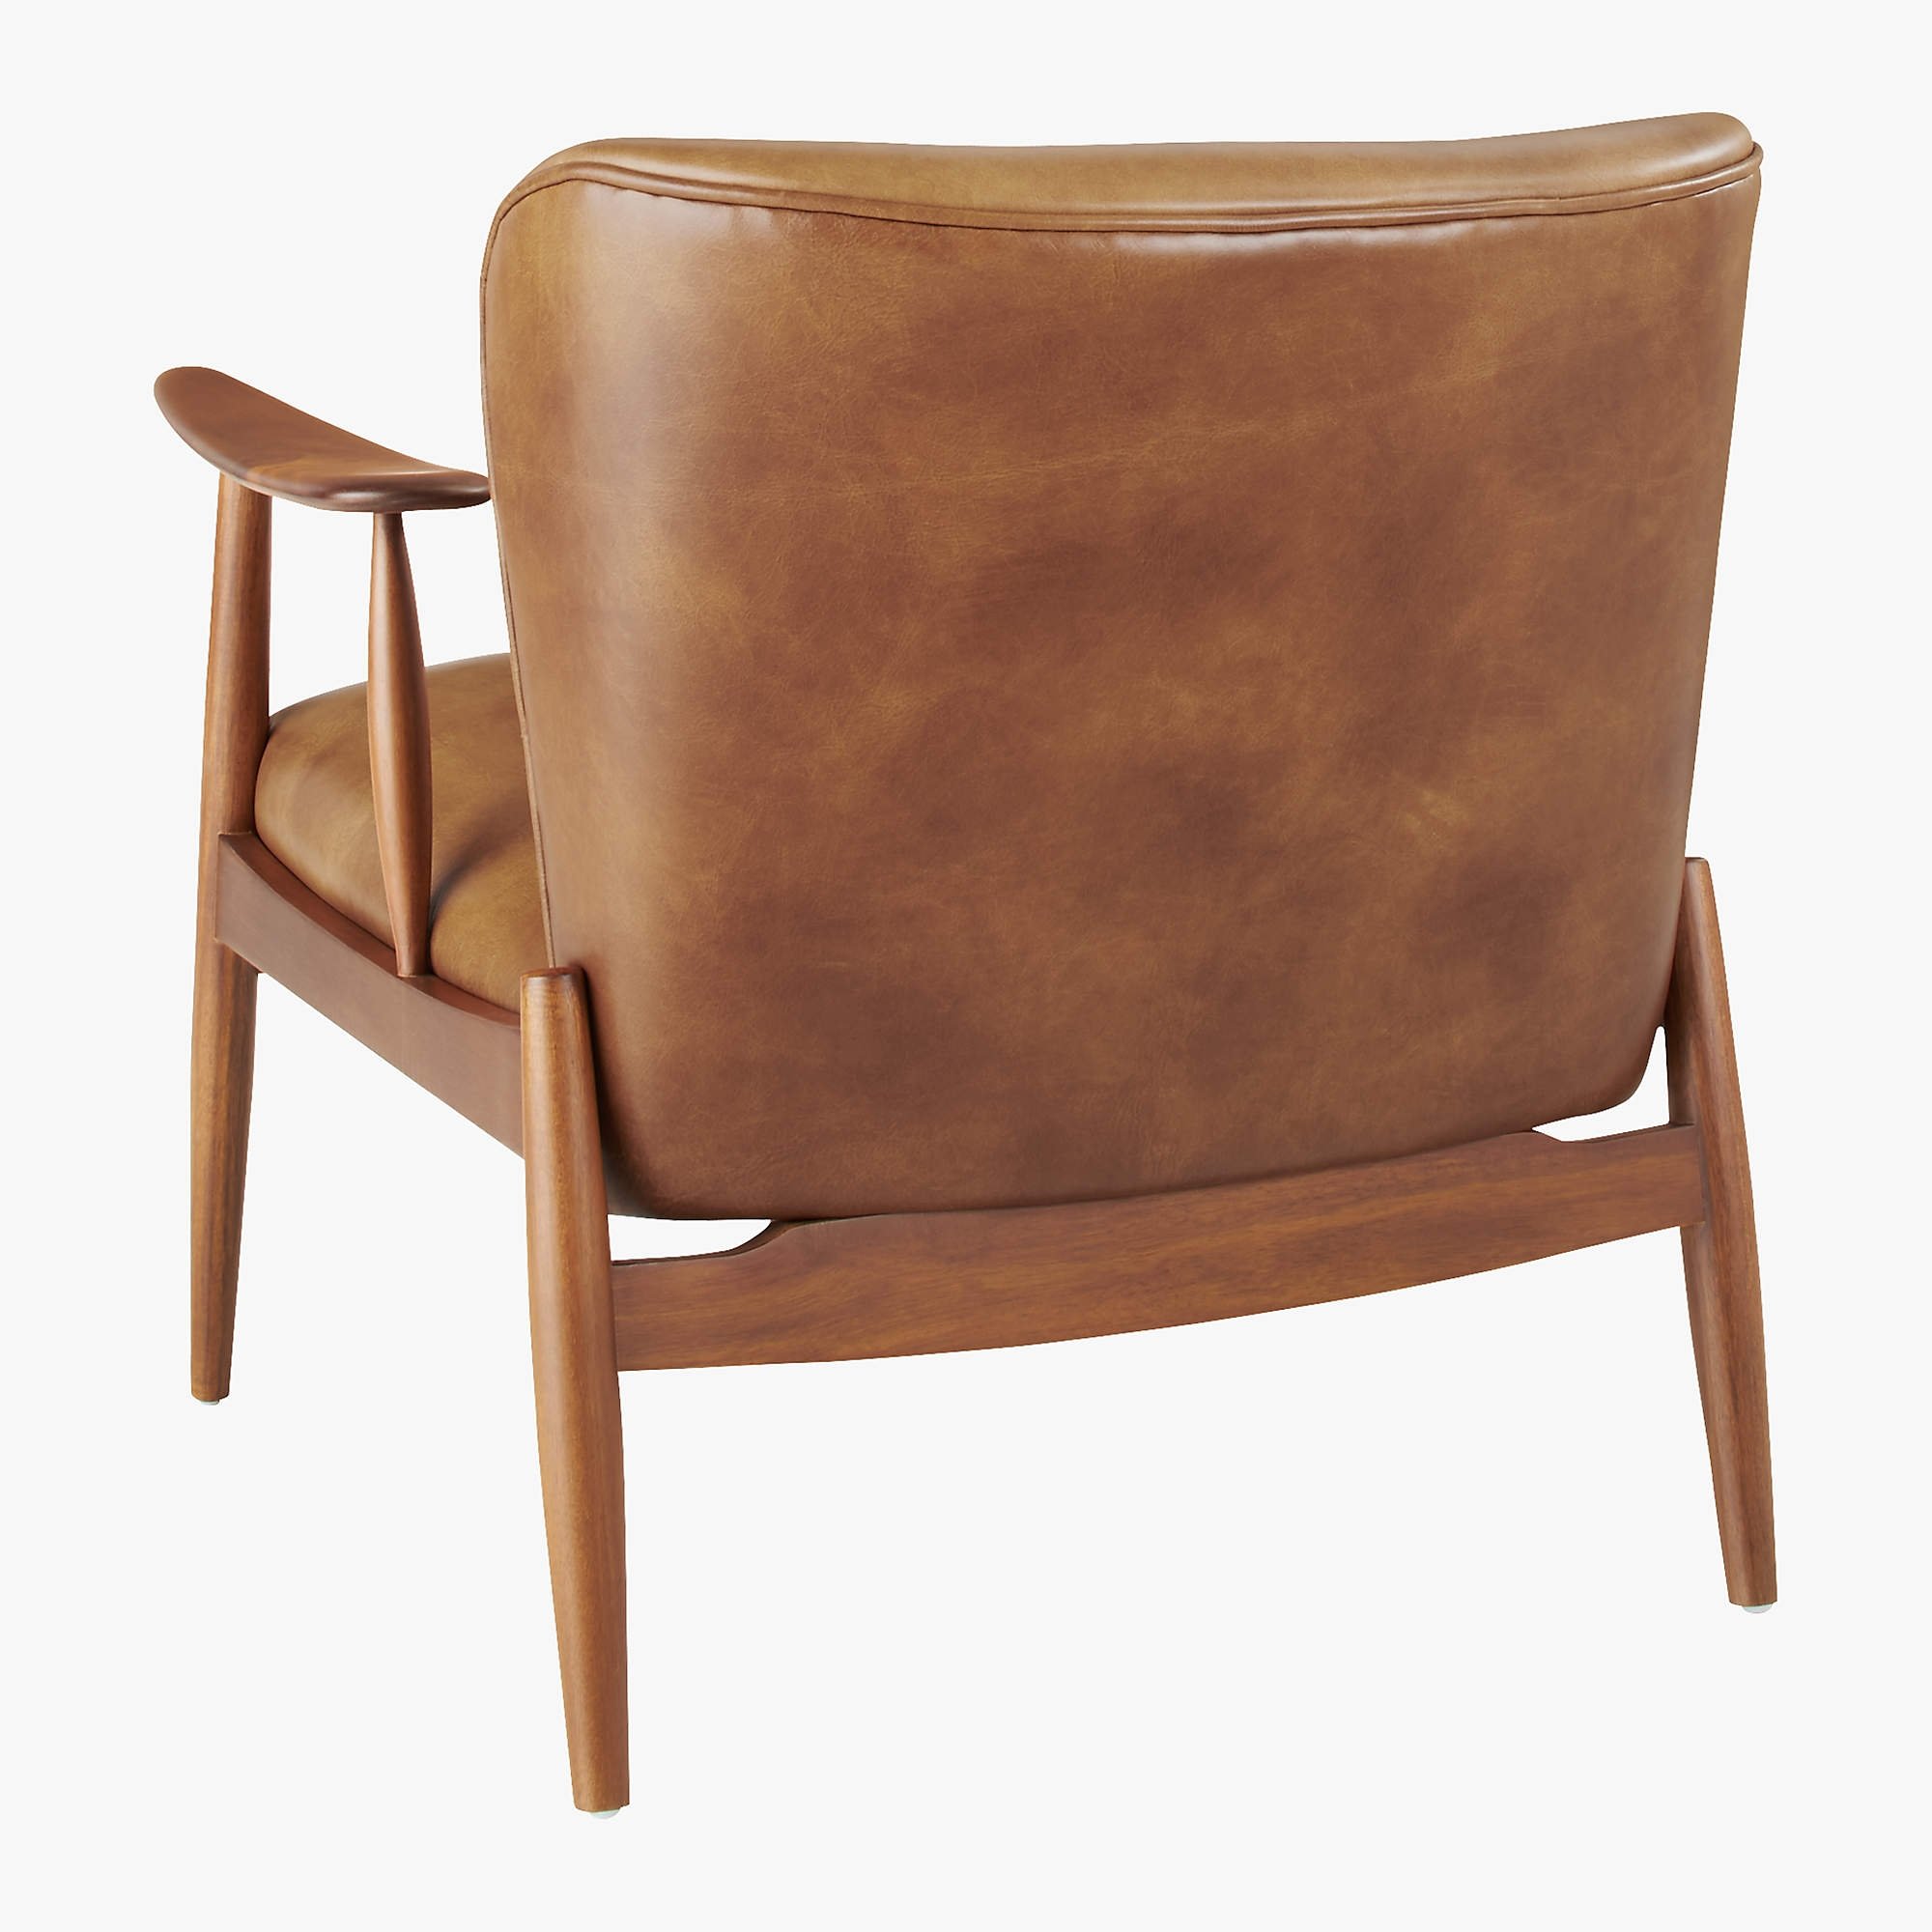 Troubadour Saddle Leather Wood Frame Chair, Kasen Brown RESTOCK Late June 2022 - Image 3